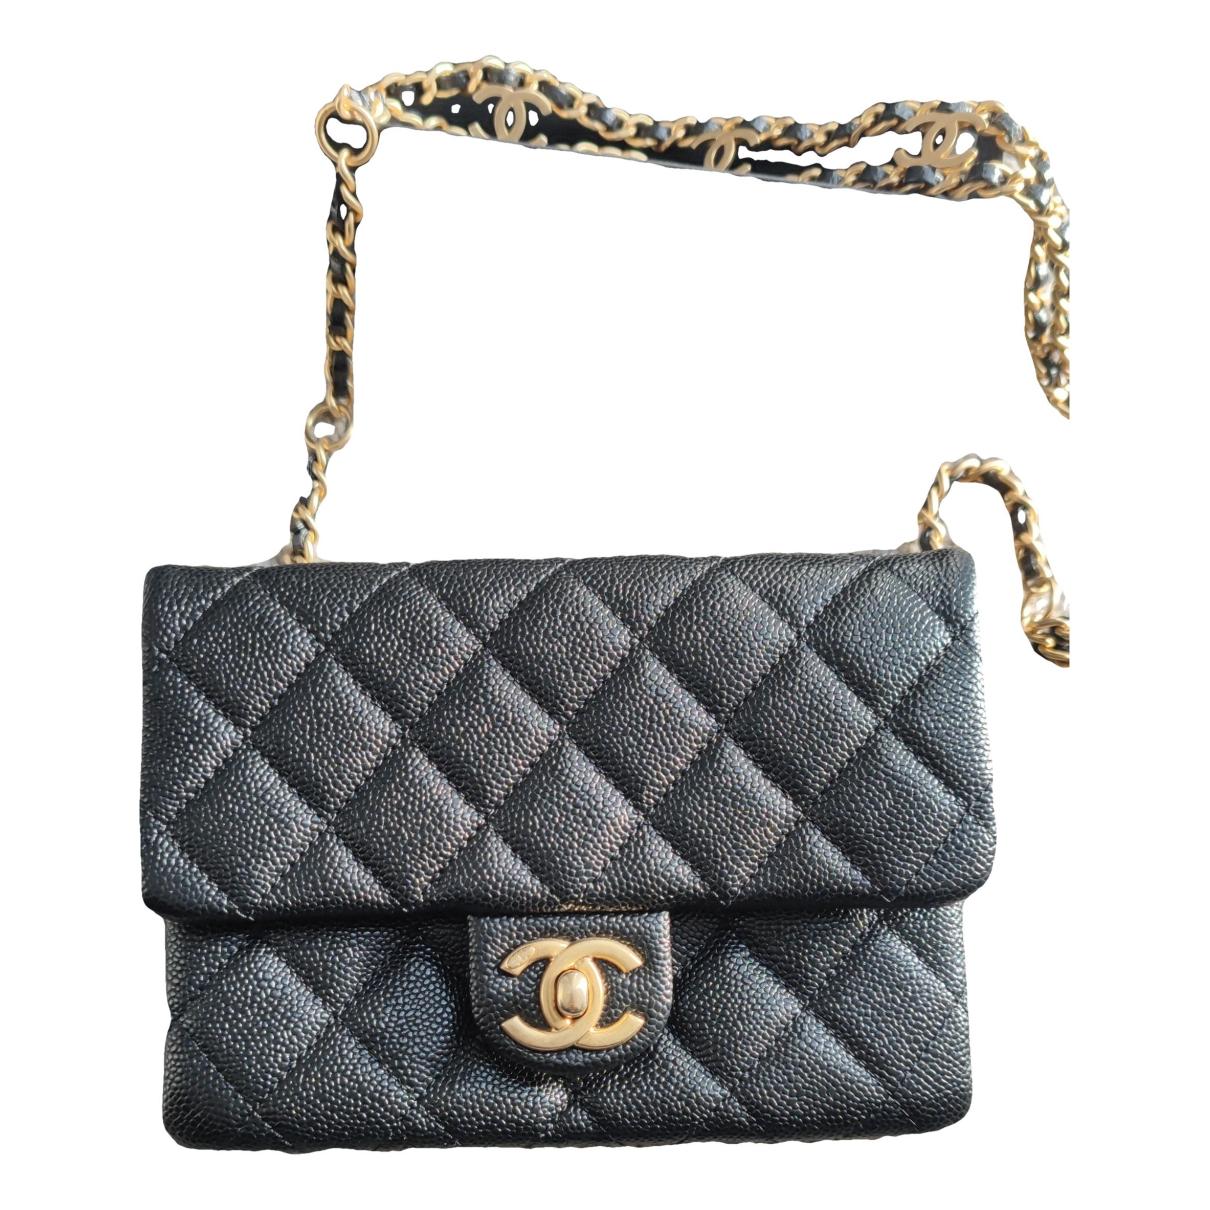 Wallet on chain timeless/classique leather crossbody bag Chanel